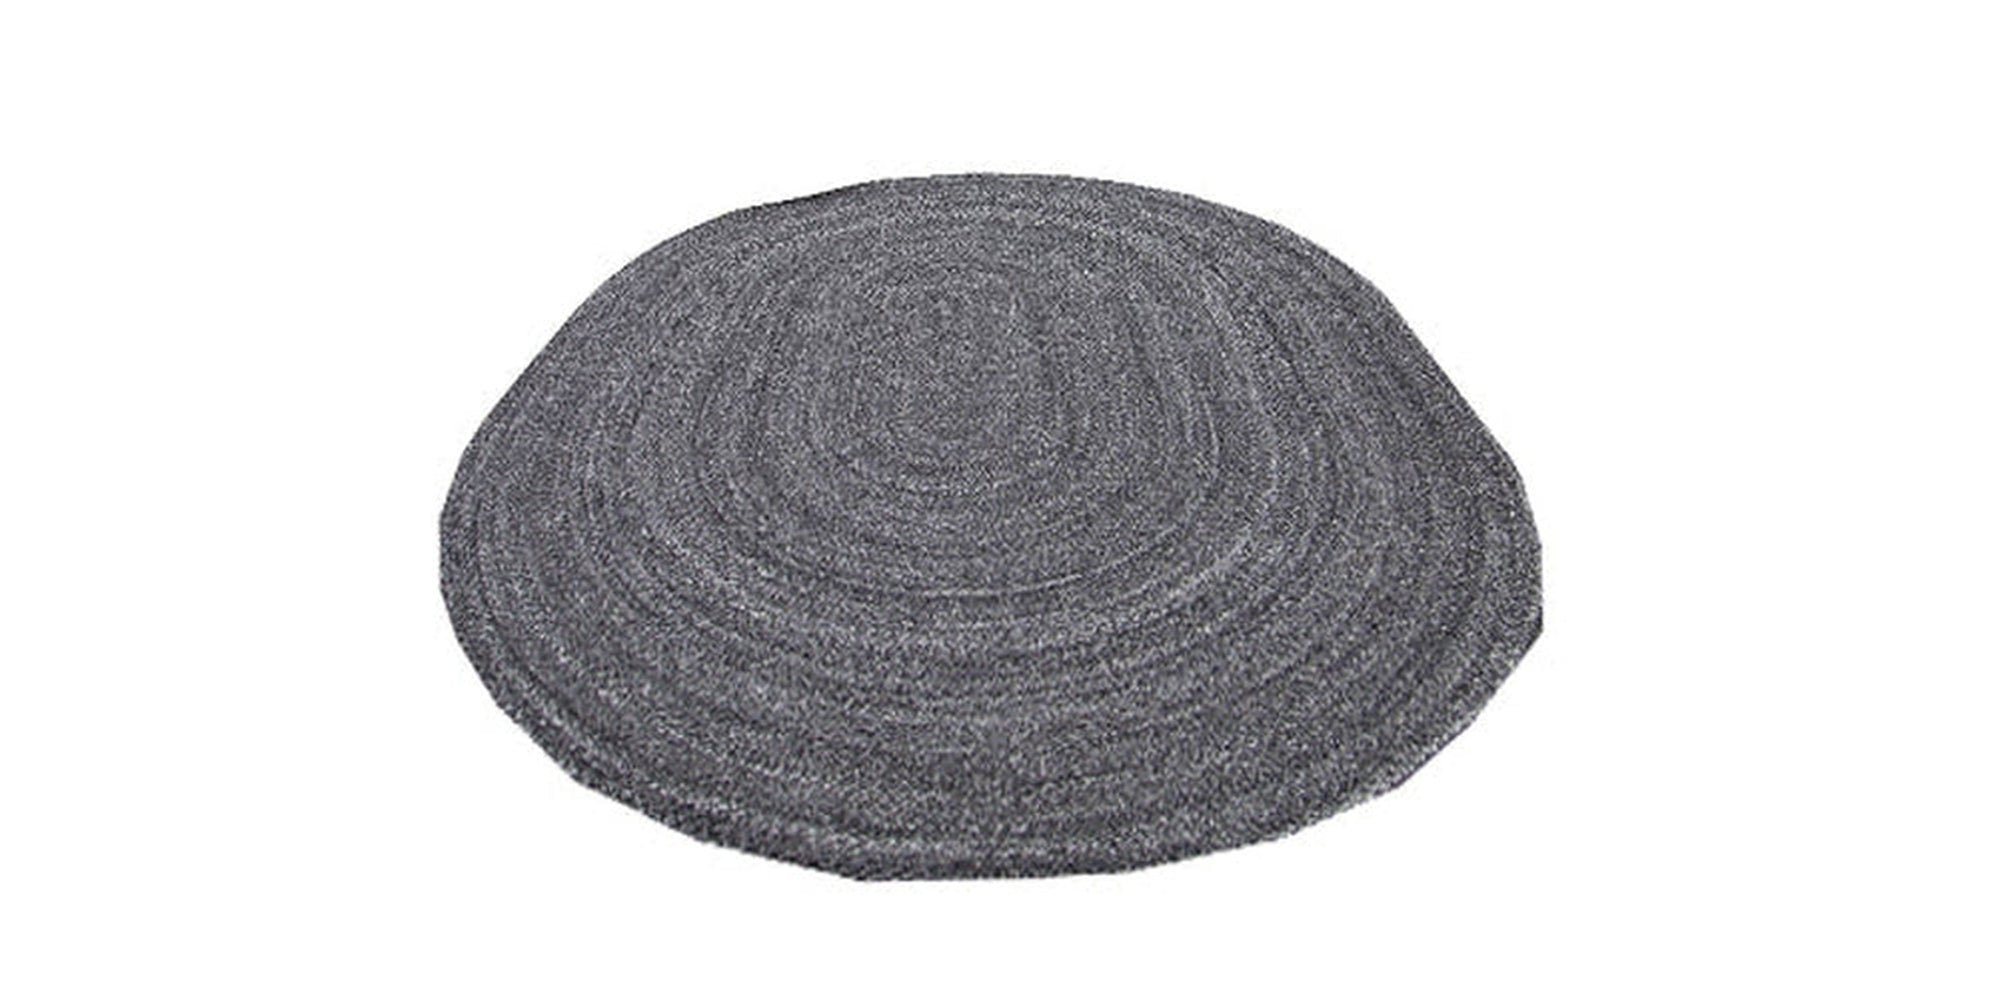 PYR1 Charcoal Braided Oval Rug-Area rug for living room, dining area, and bedroom